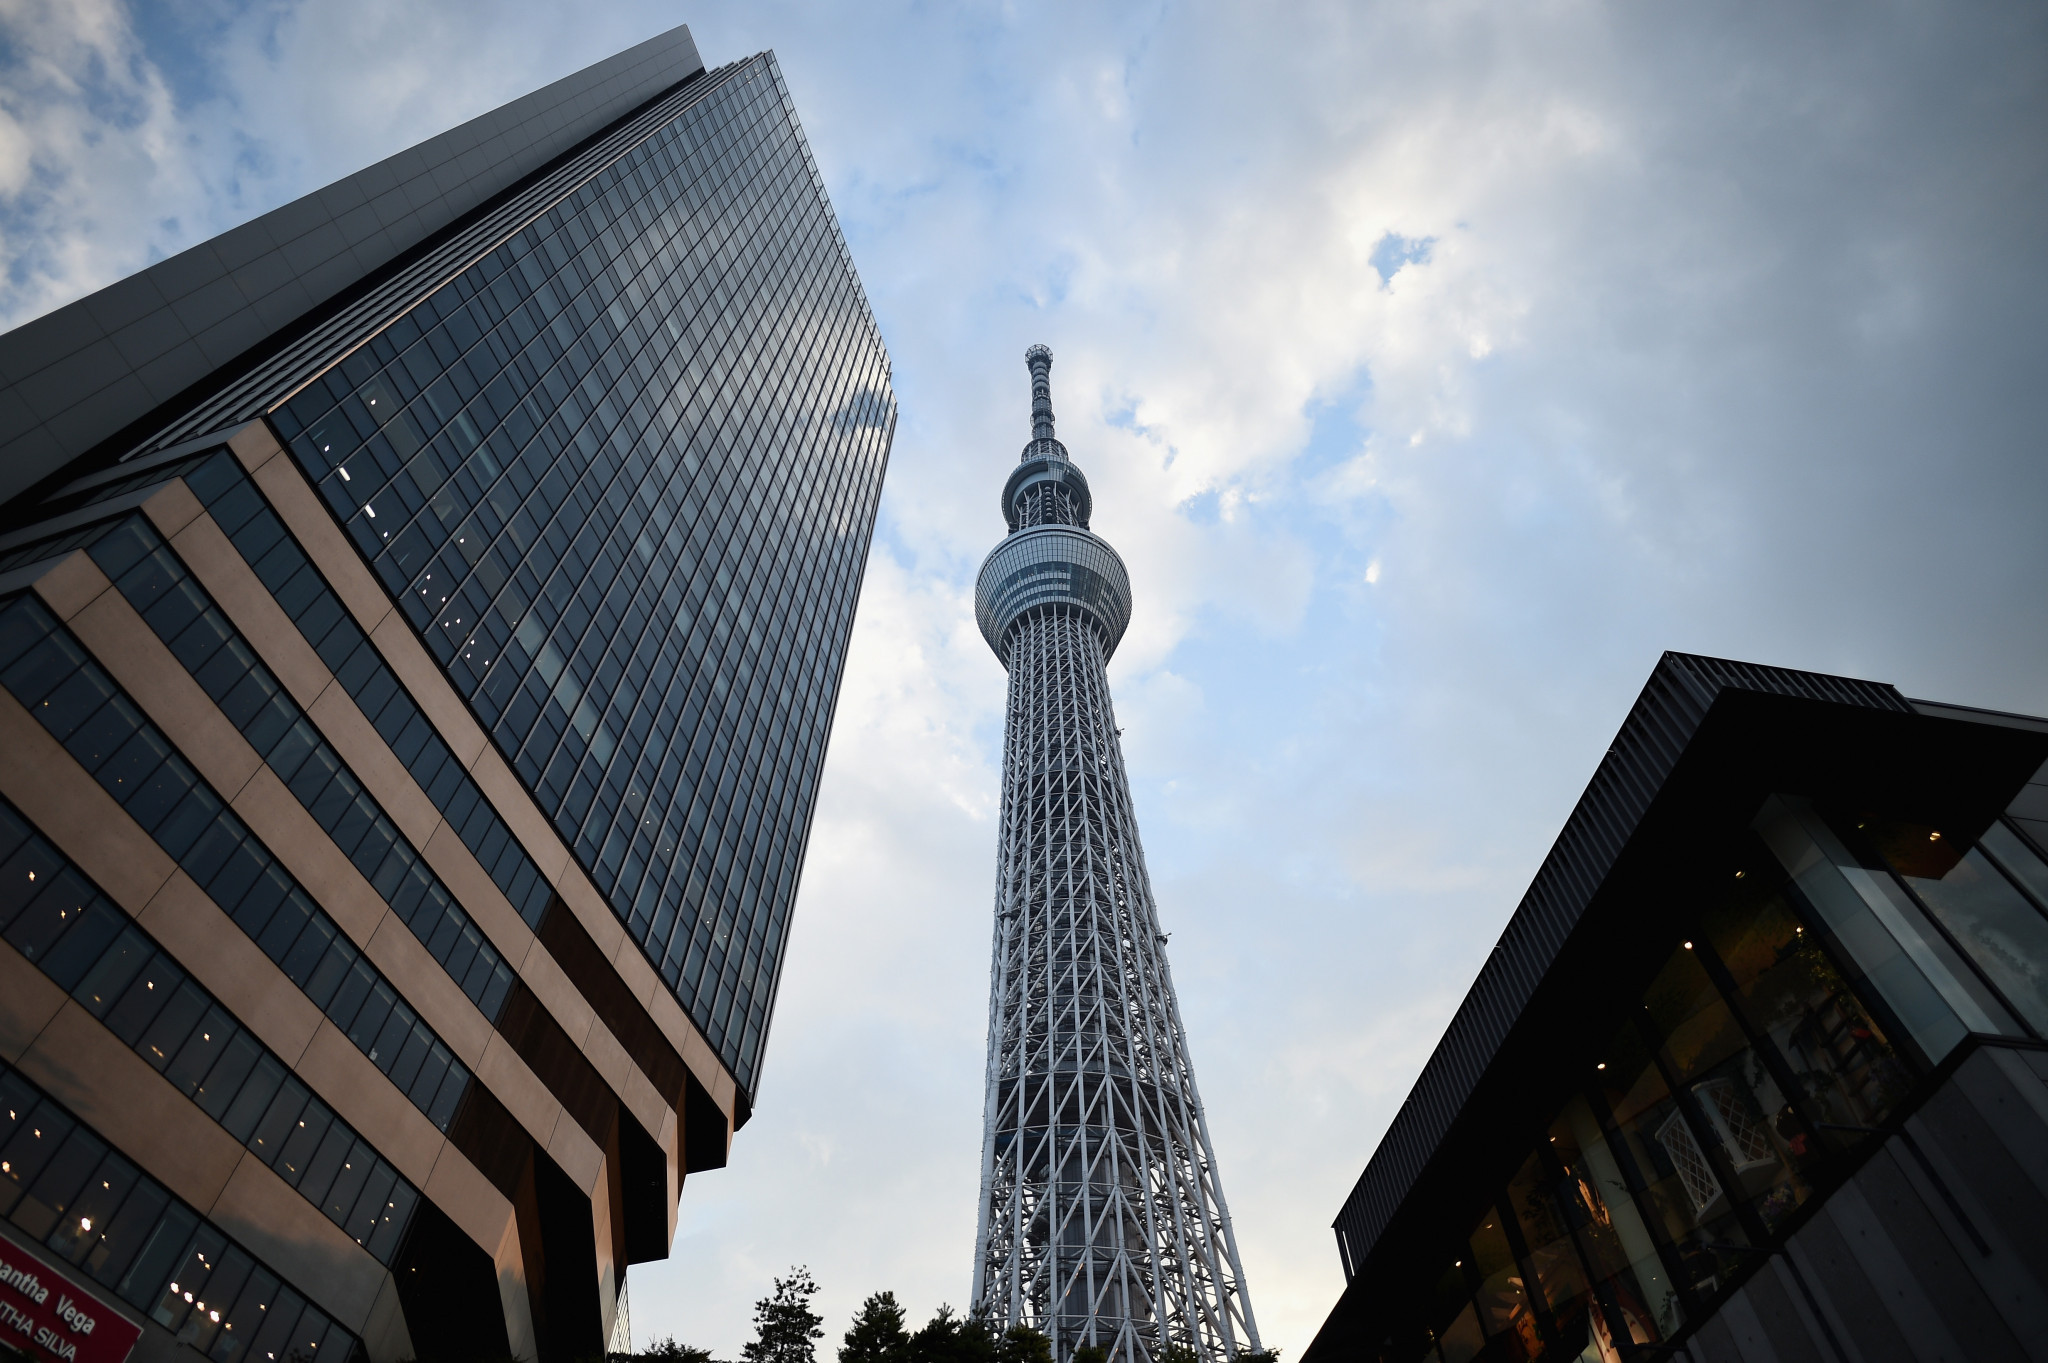 Tokyo 2020 announces sponsorship deal with Tokyo Skytree